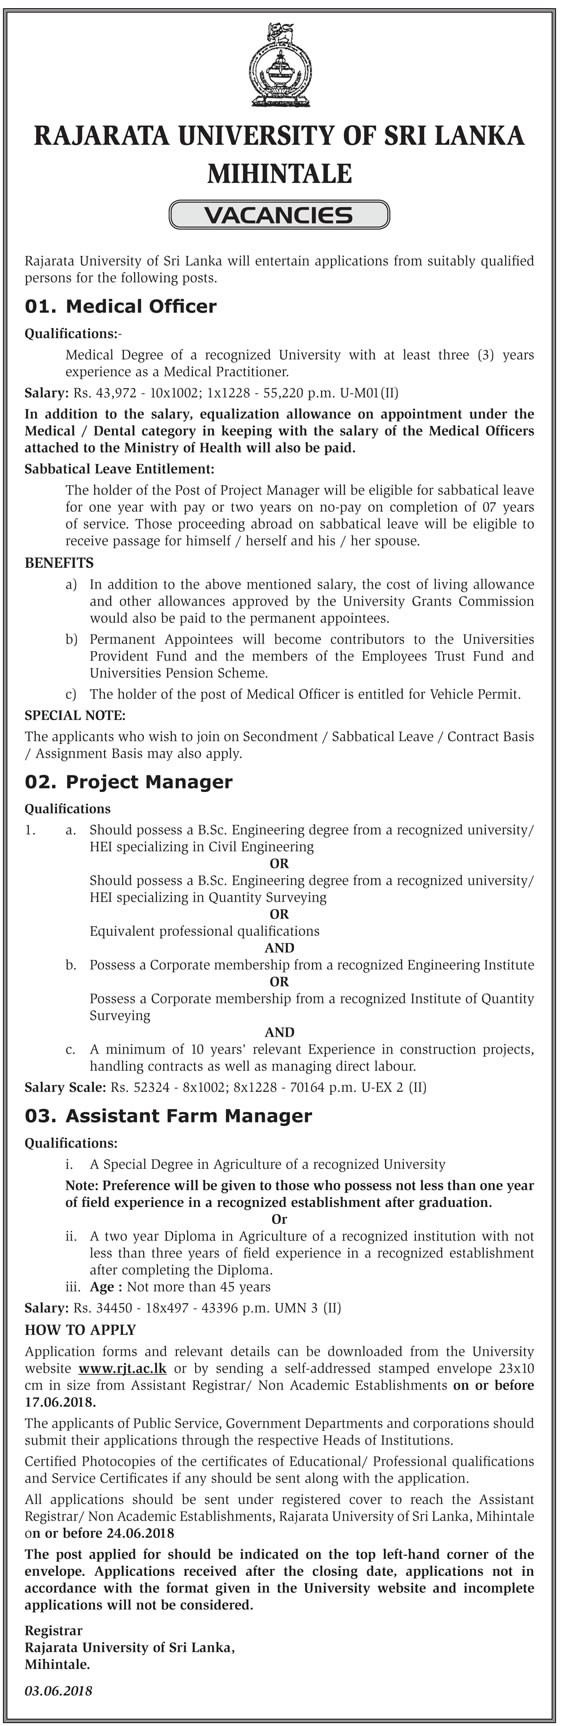 Medical Officer / Project Manager / Assistant Farm Manager - Rajarata University Mihintale Jobs Vacancies